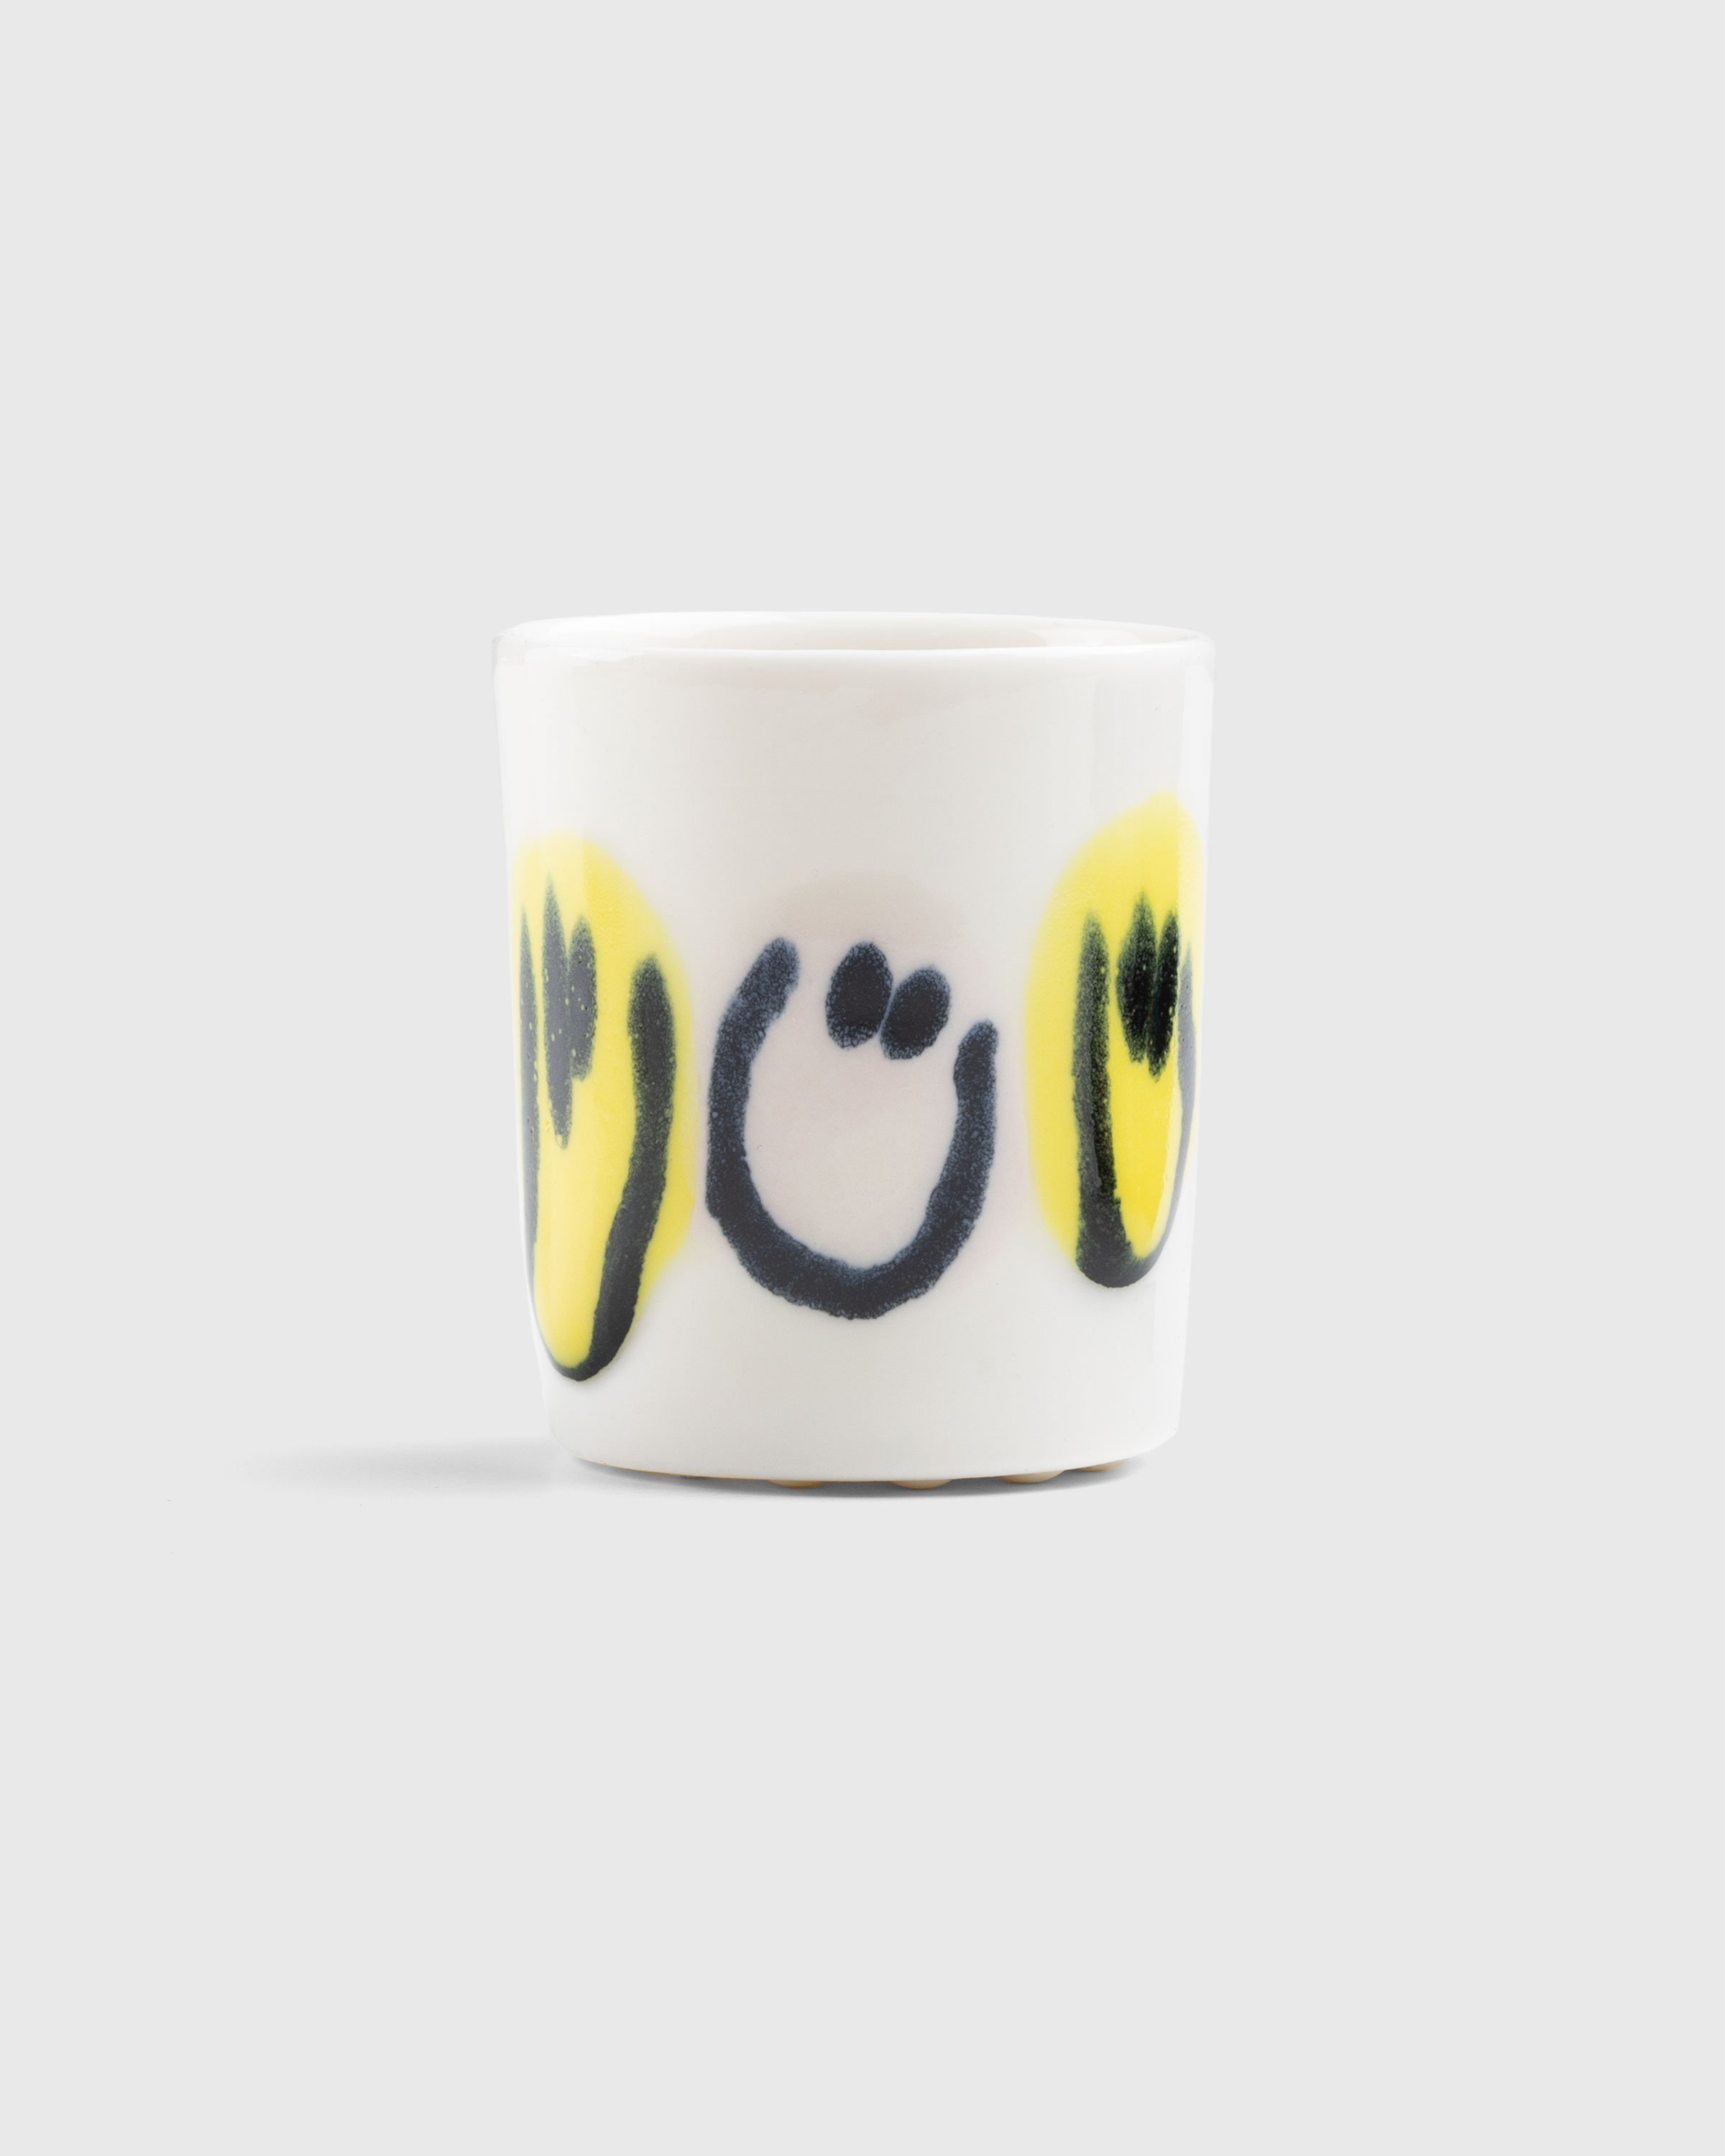 Carne Bollente x Frizbee Ceramics - Ride Together Cup White - Lifestyle - Multi - Image 1